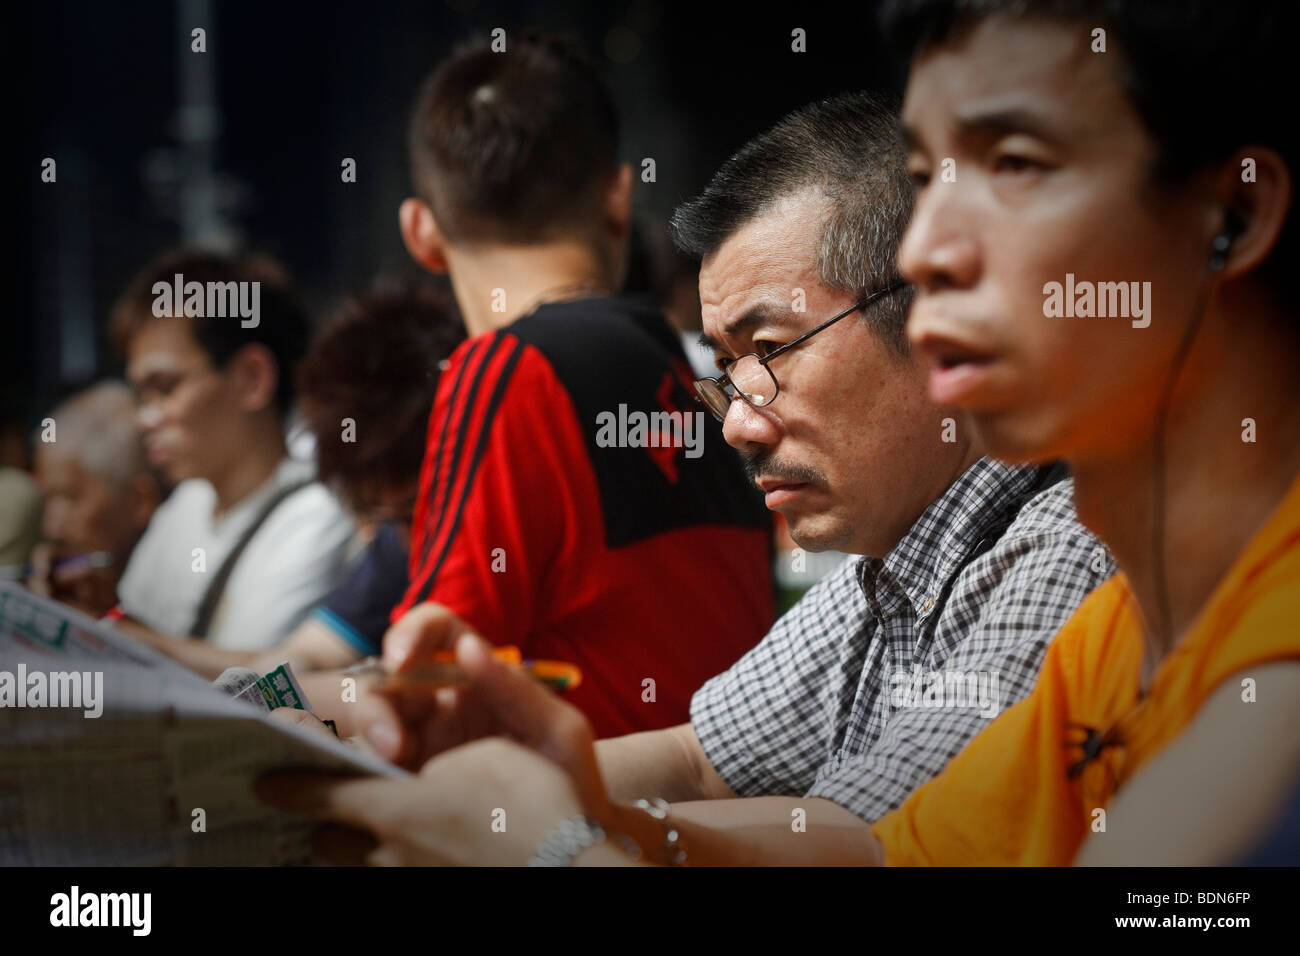 Punters study the race form at a night horse racing event at the Happy Valley race course in Hong Kong. Stock Photo